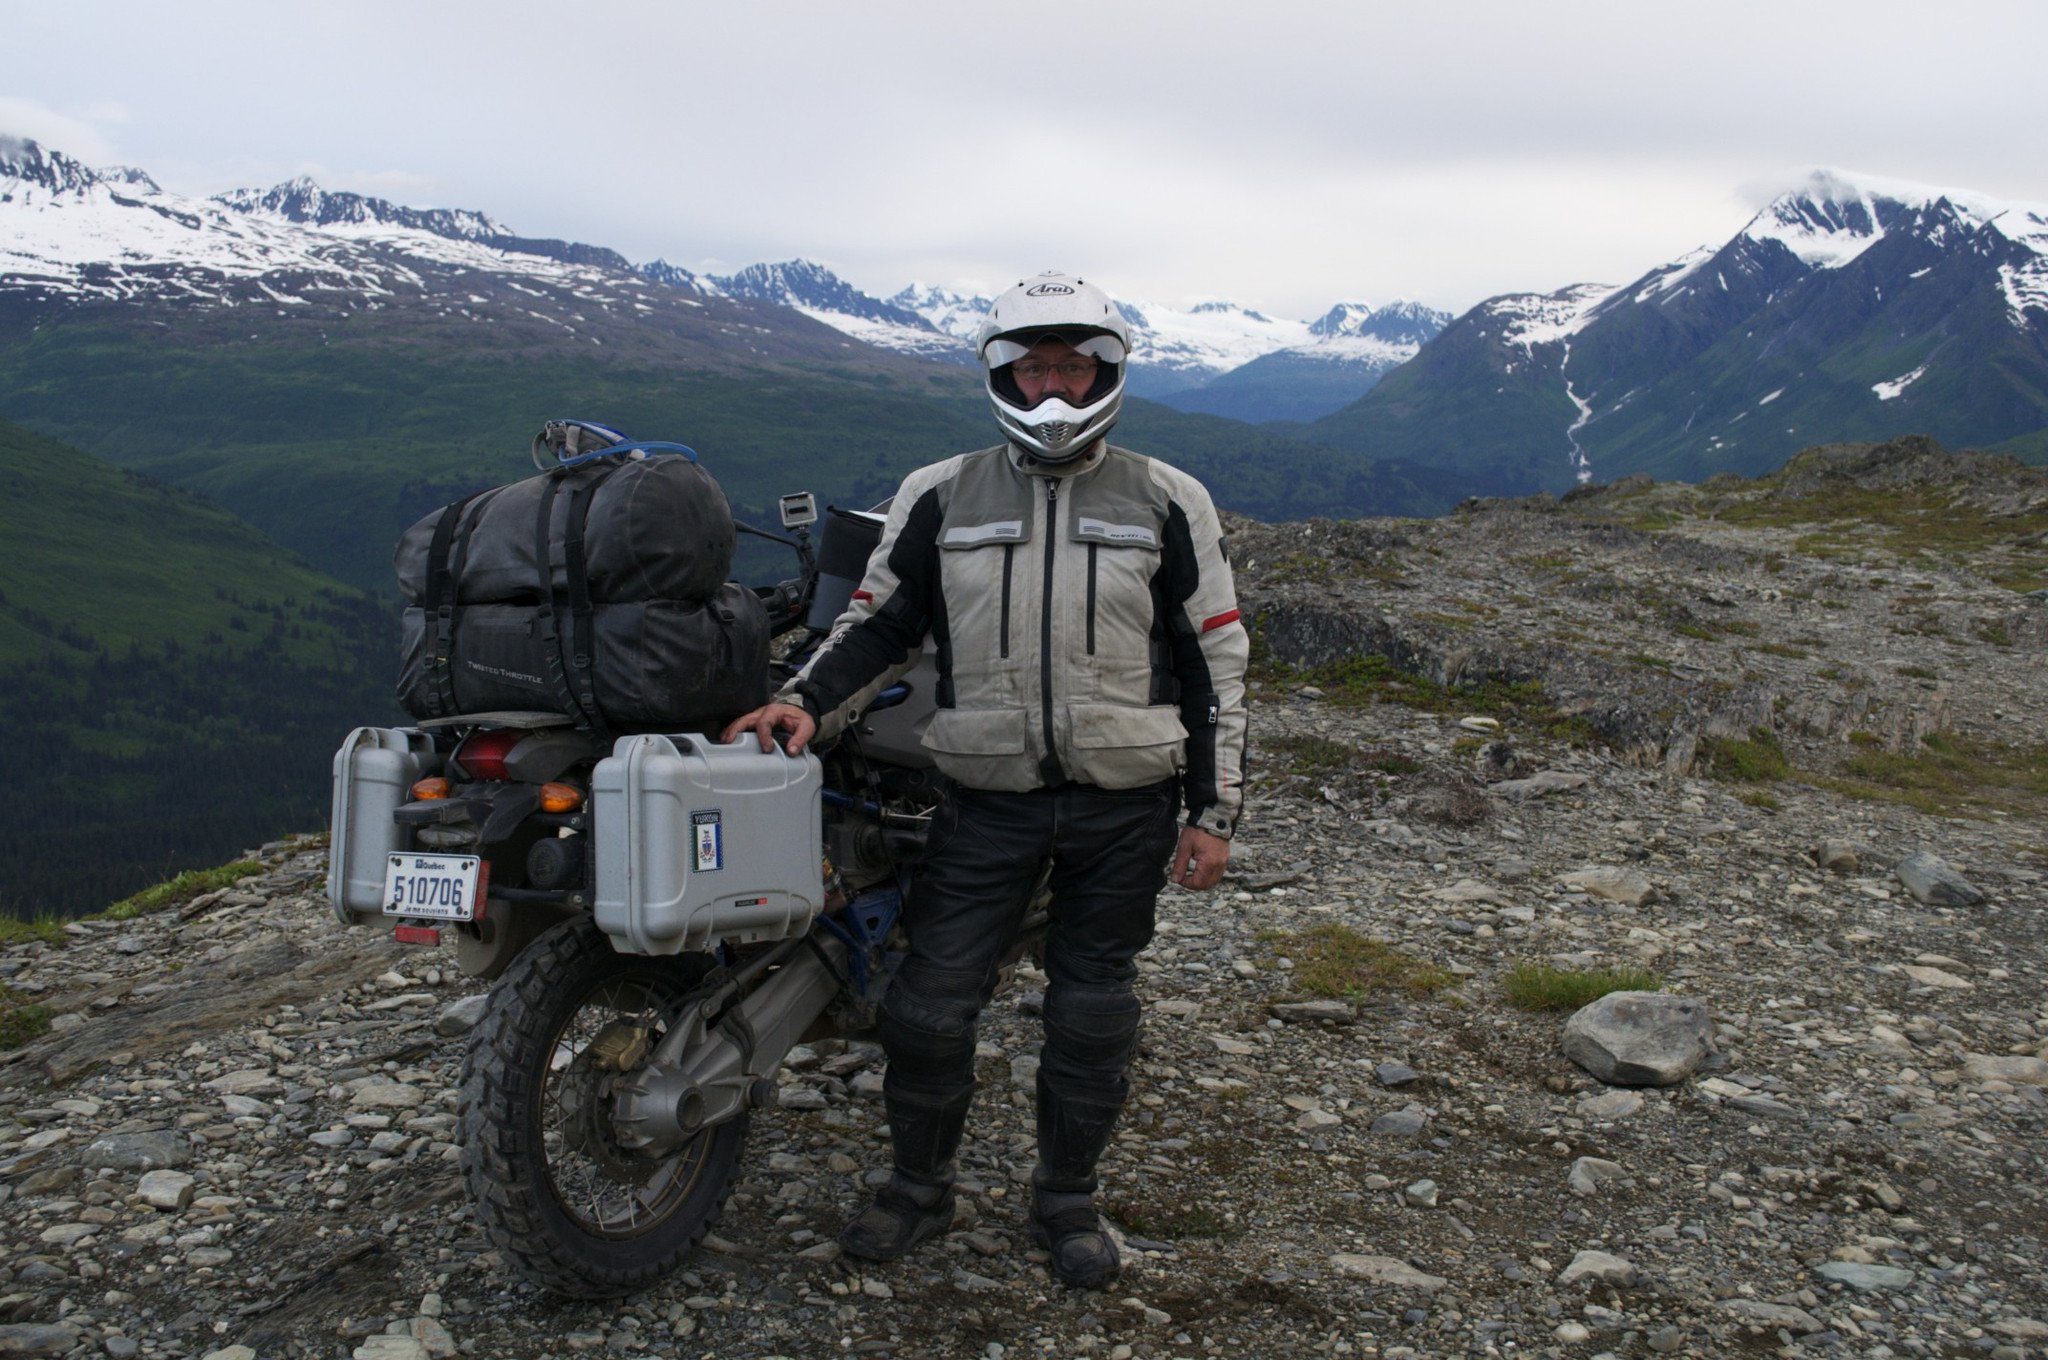 A 11,200 km motorcycle ride, from Quebec to Alaska in 18 days